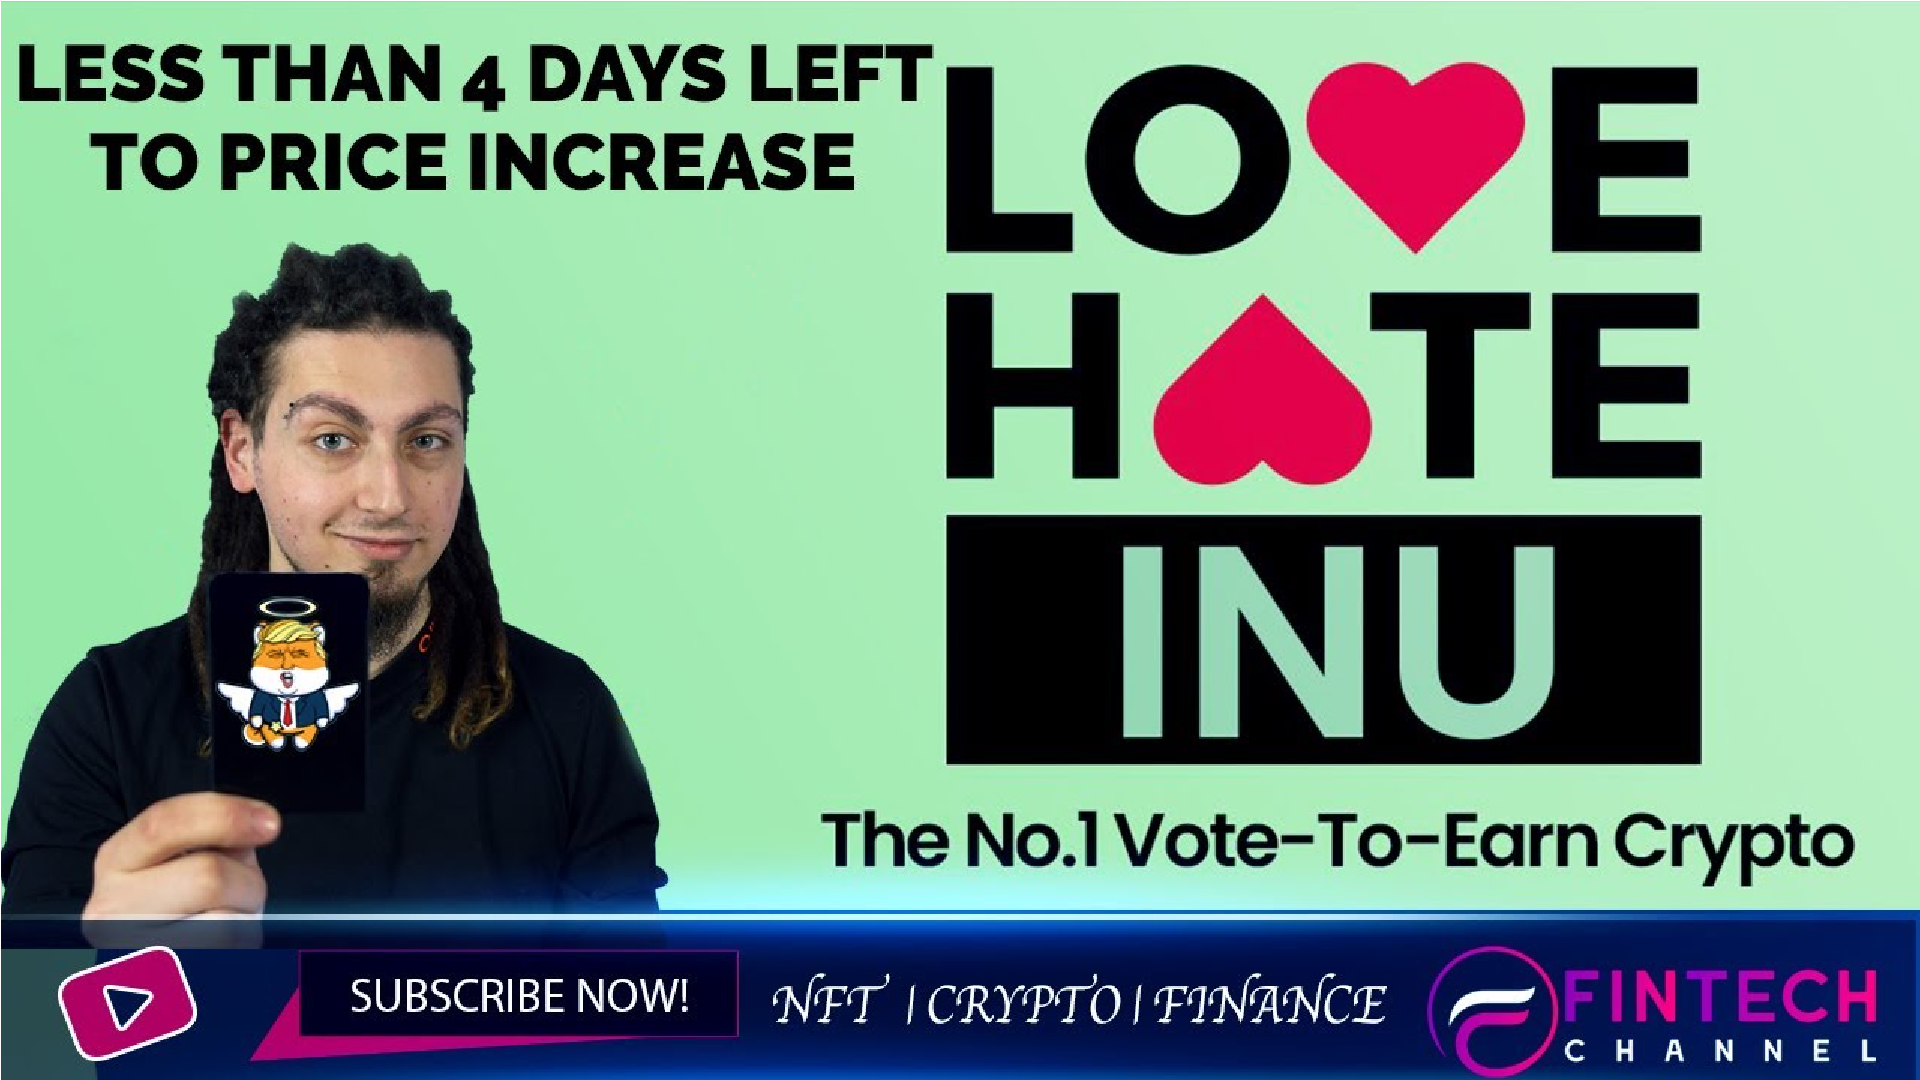 FinTech Channel Reviews Love Hate Inu The Number One Vote-to-Earn Crypto